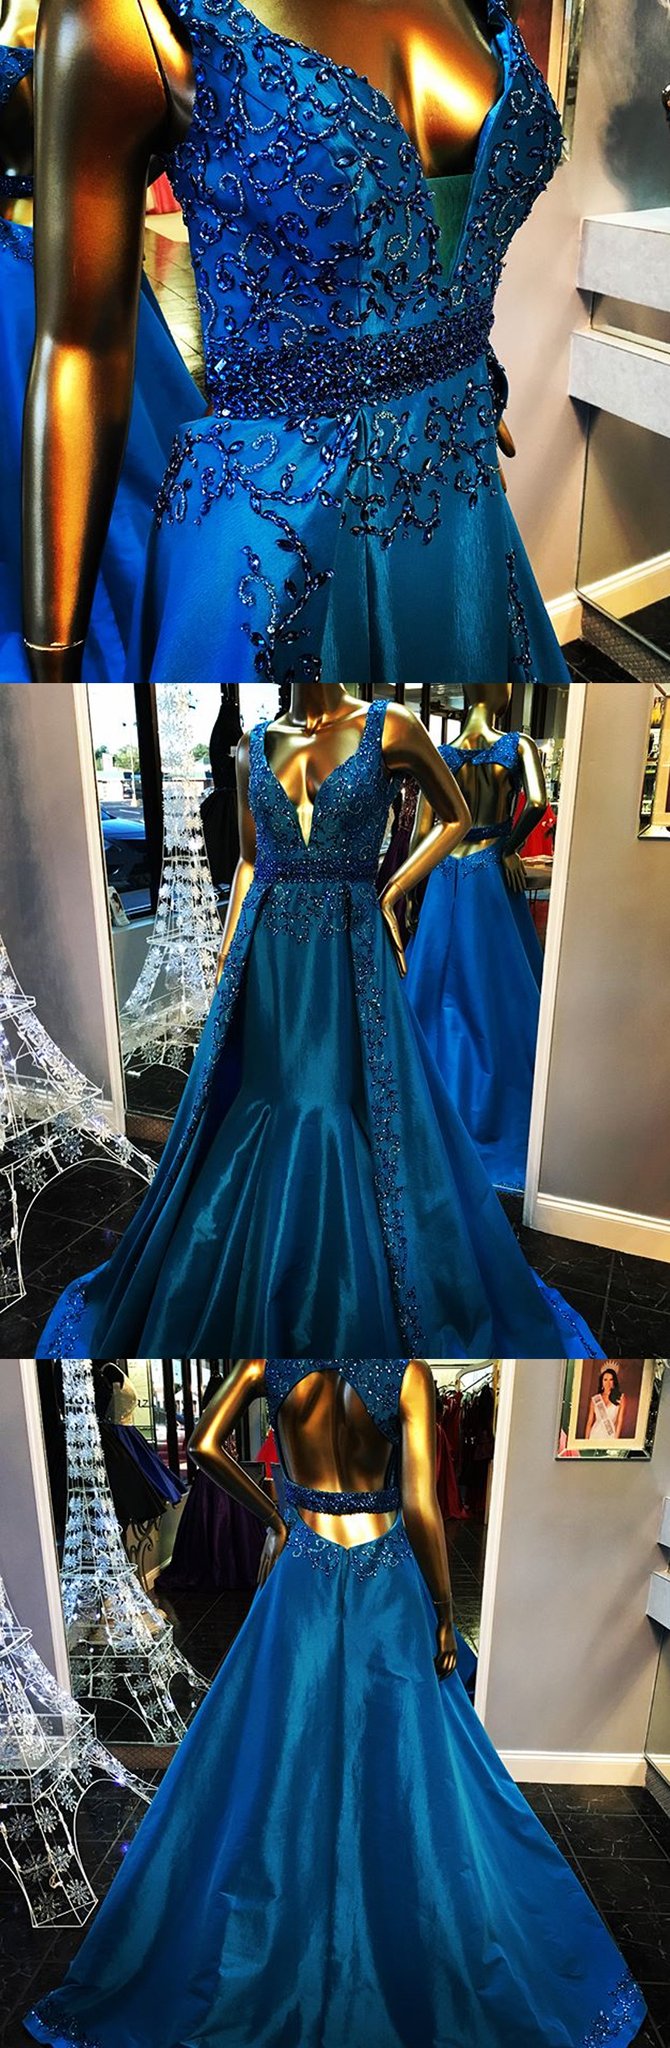 GORGEOUS ROYAL BLUE BEADING RHINESTONE BALL GOWN BACKLESS FORMAL EVENING PARTY PROM DRESSES 10022